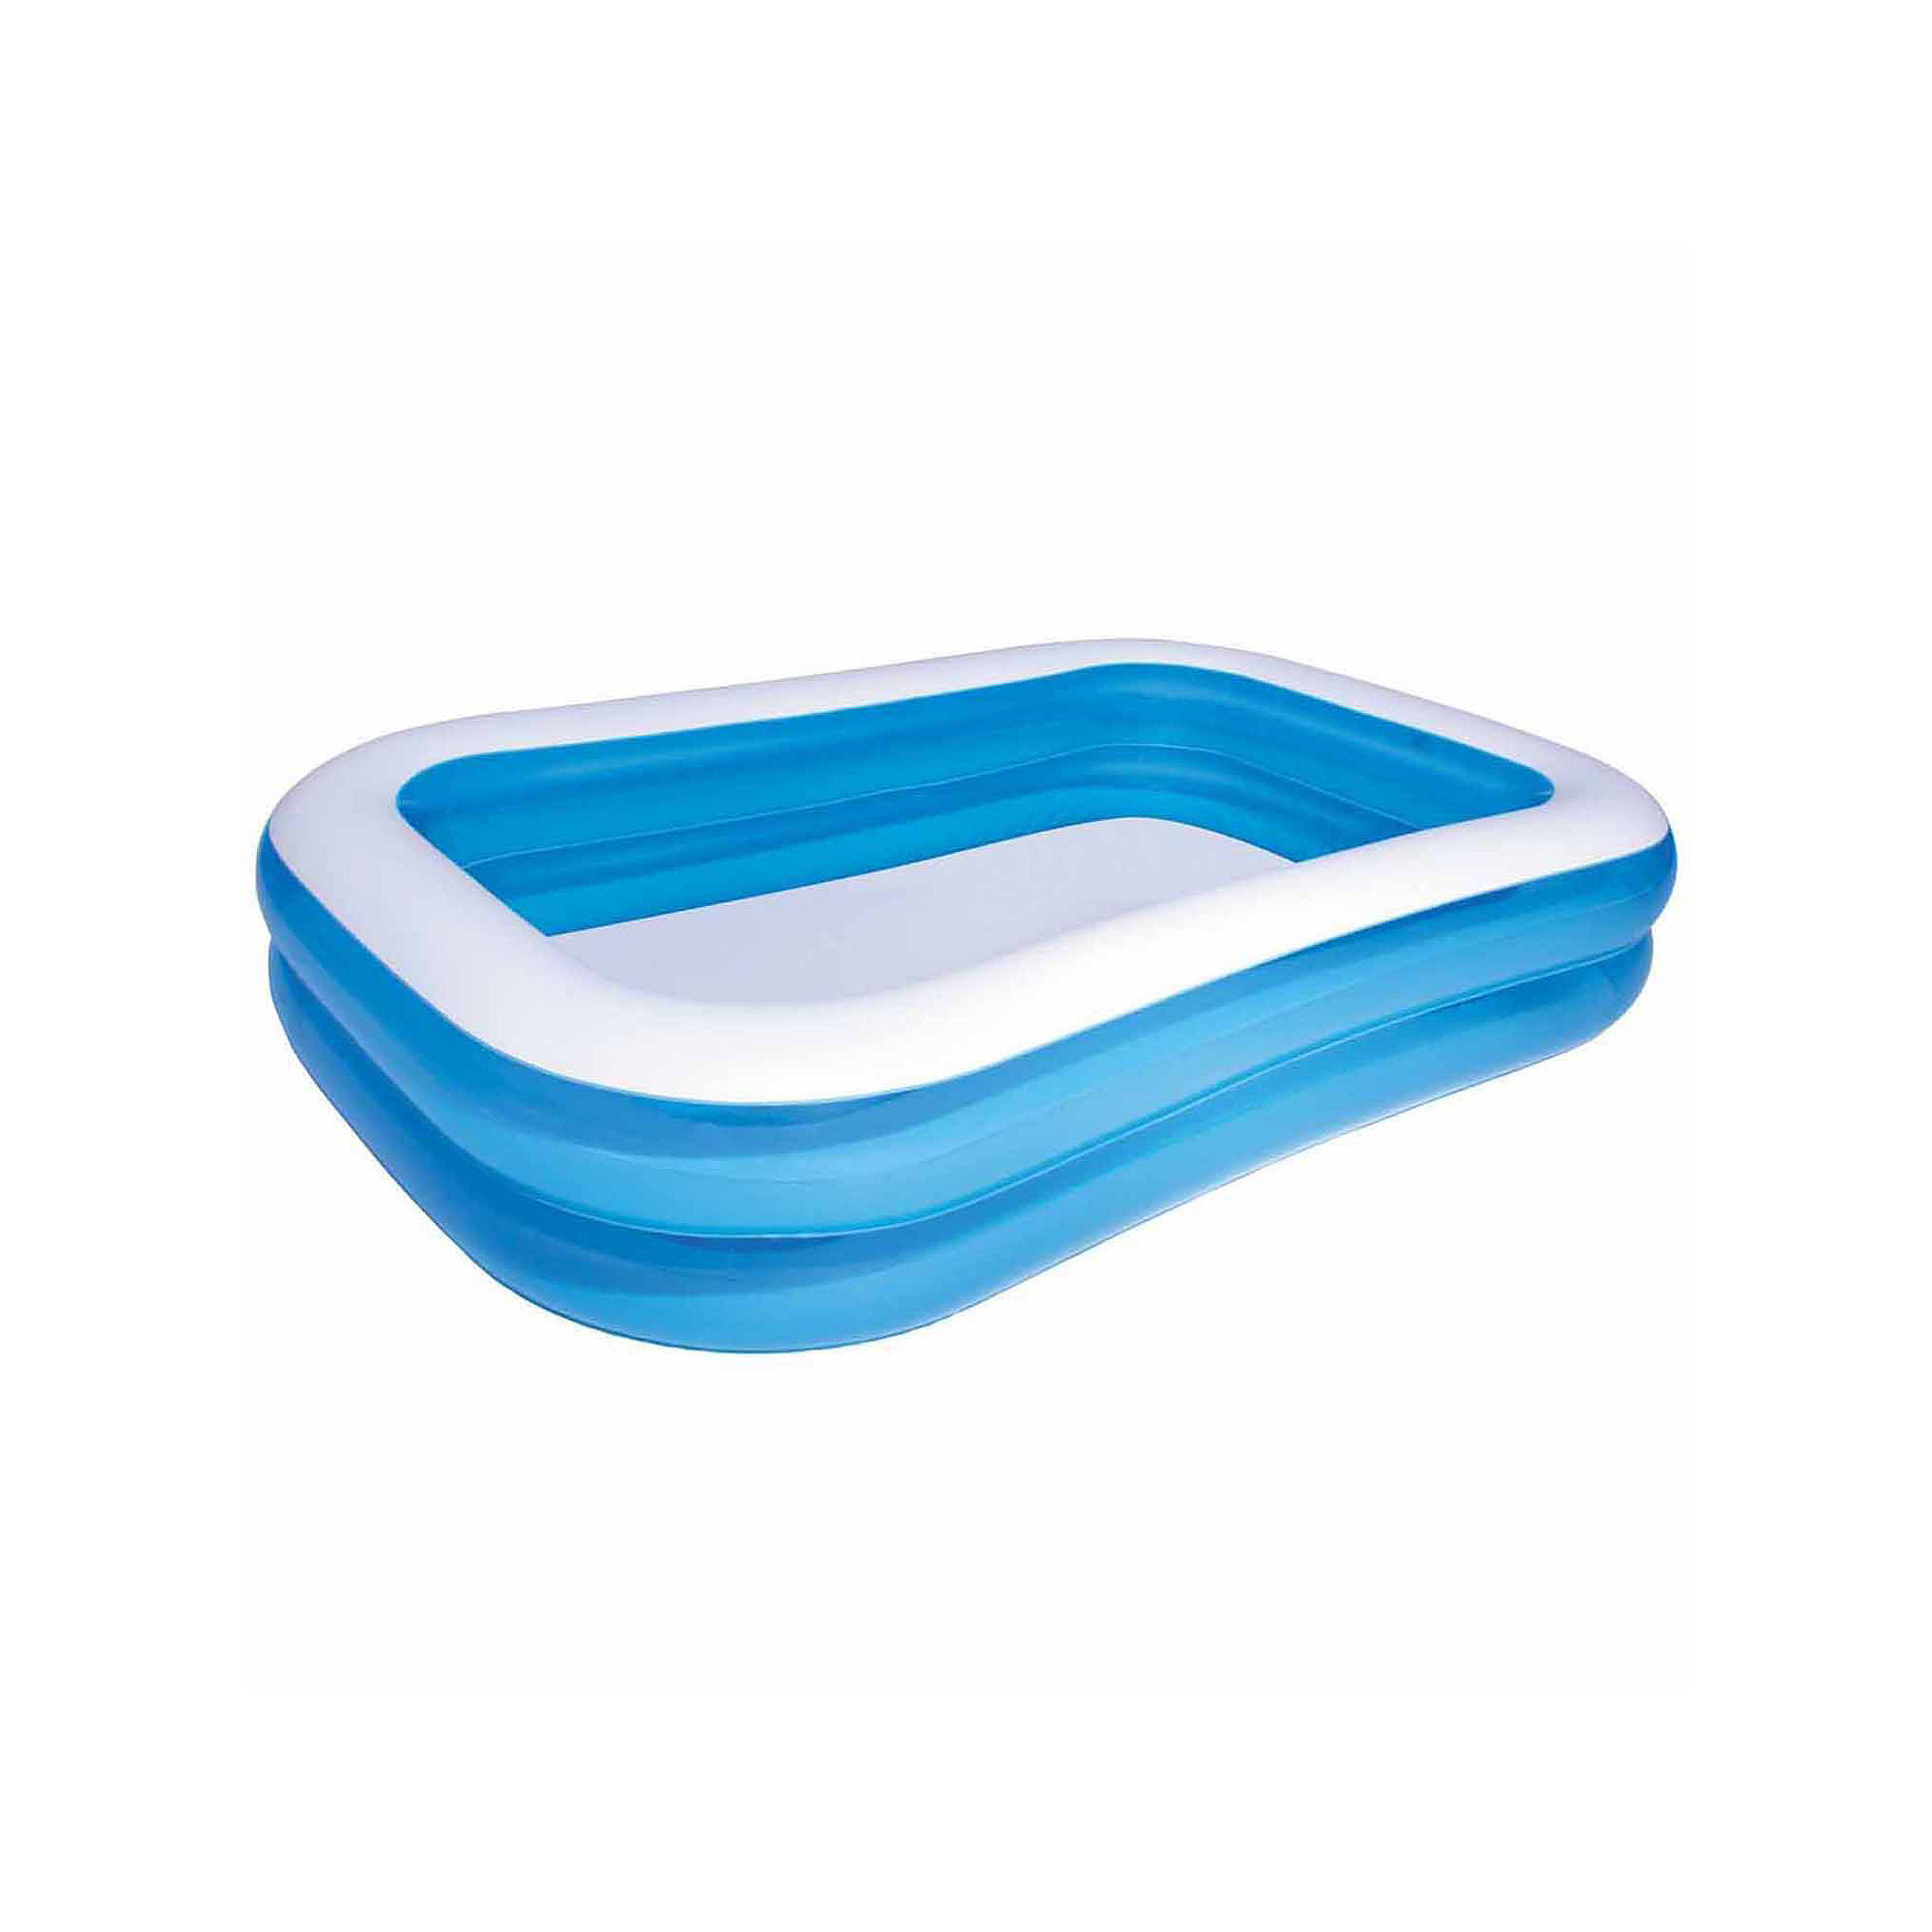 UPC 821808540068 product image for Bestway Blue Rectangular Family Pool 8.5 feet x 69inches x 20 inches | upcitemdb.com